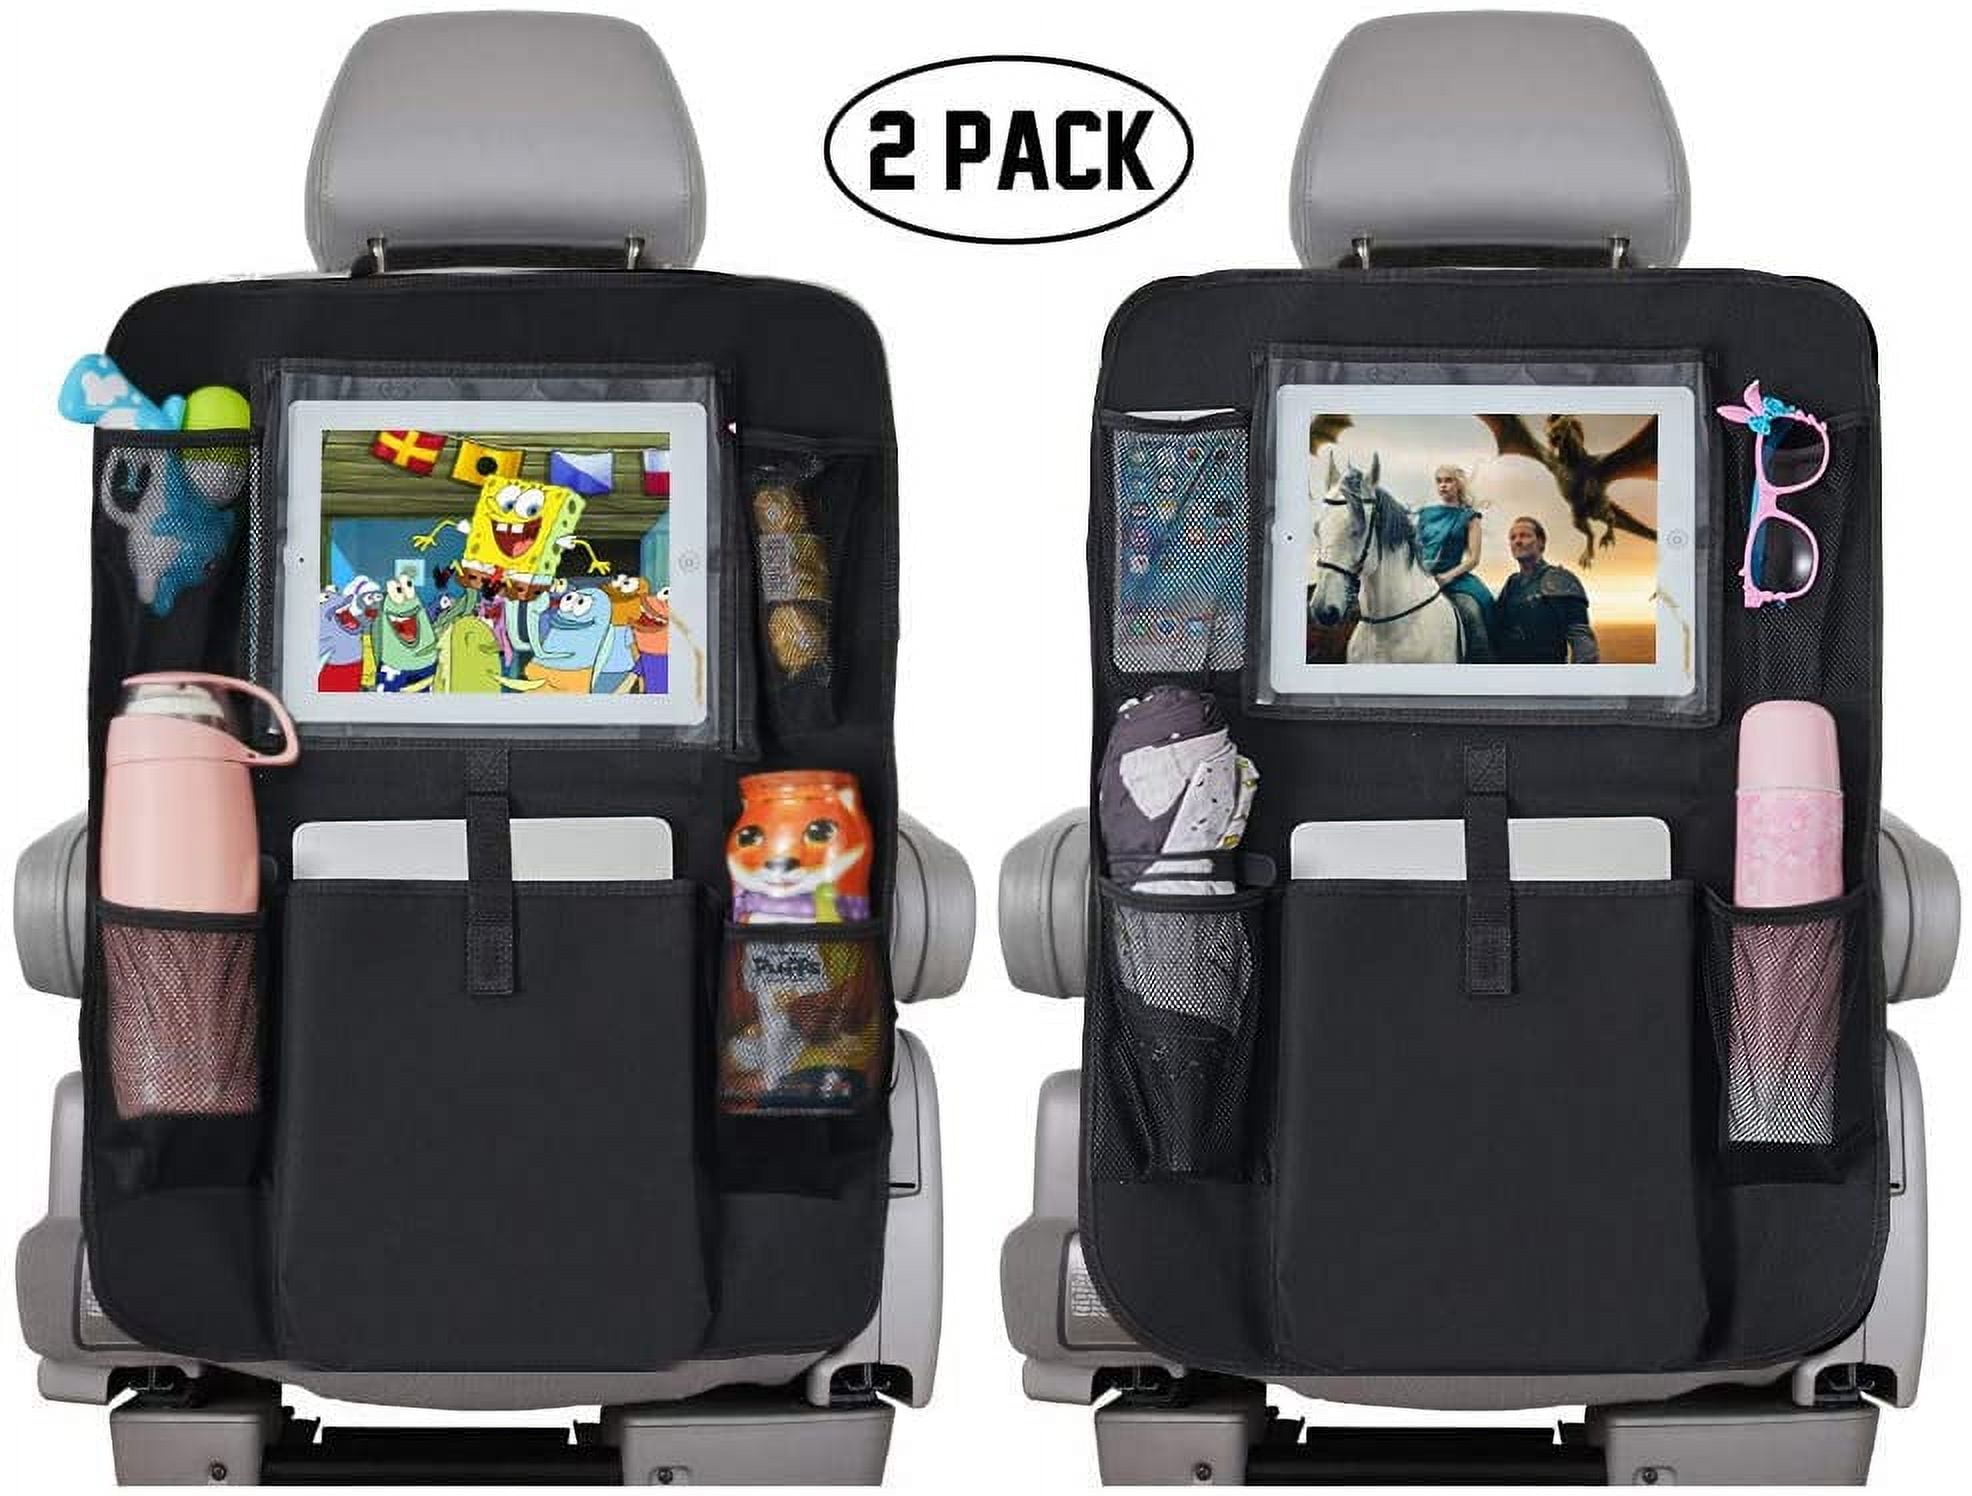 2 Pack Backseat Car Organizer for Kids, Kick Mats Cover Car seat Protector  with Touch Screen 10 Ipad Holder +5 Storage Pockets Vehicle Travel  Interior for Toddlers 